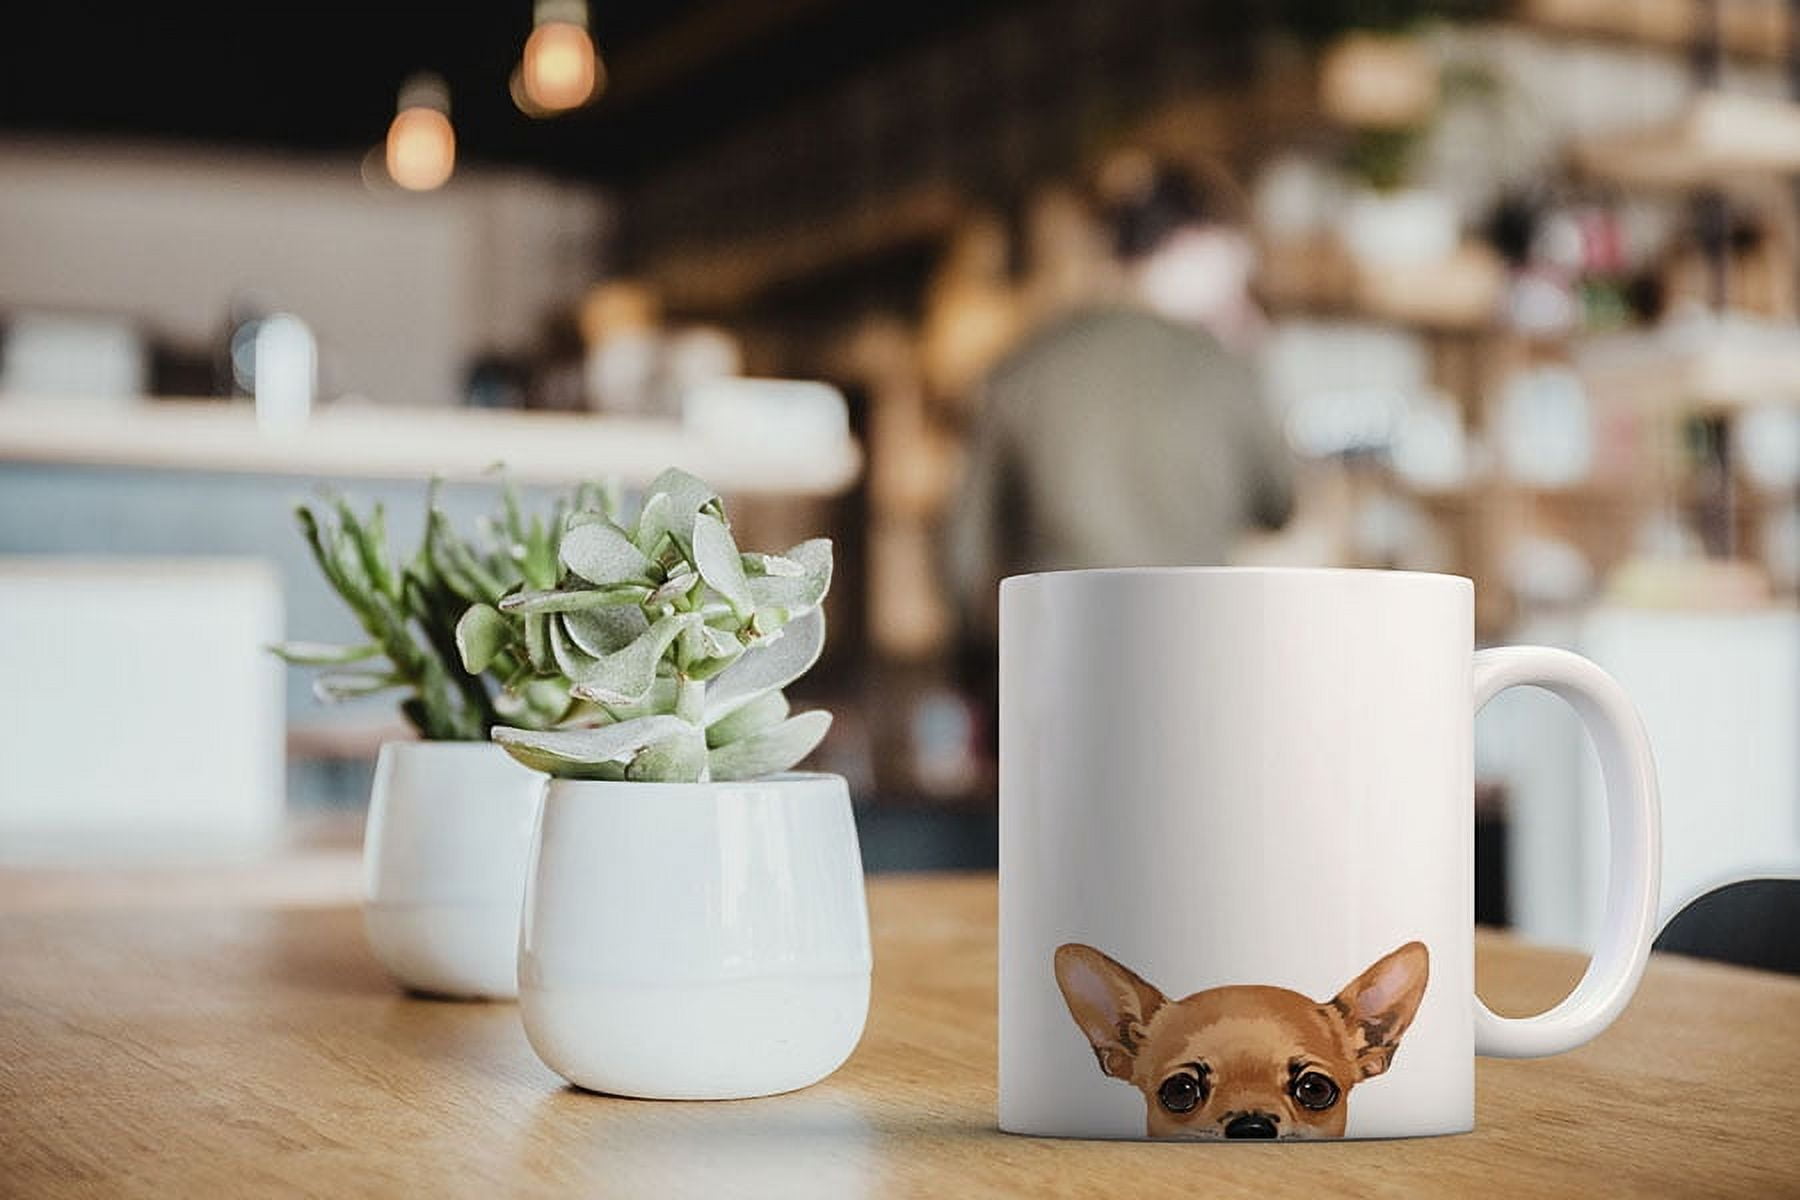 A hunting dog with its game between its teeth Travel Coffee Mug Thermos Mug  Thermal Coffee Bottle Teaware Cafes Luxury Cup - AliExpress